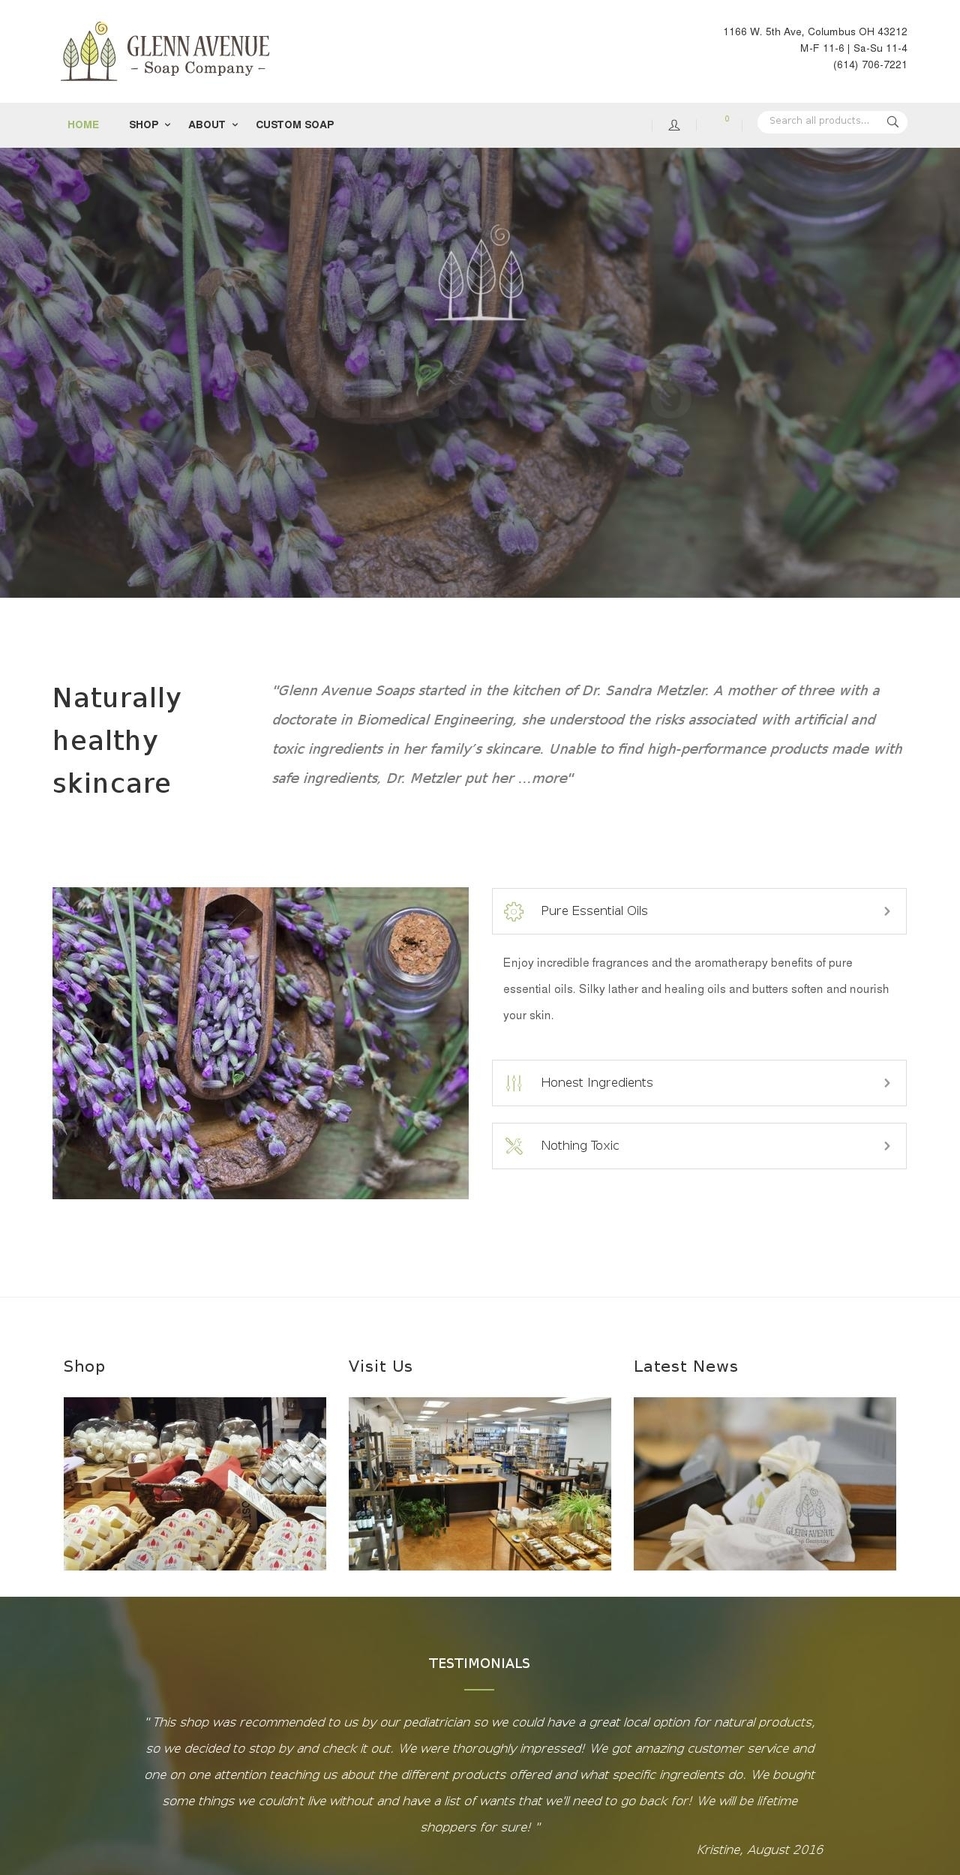 Launch Shopify theme site example glennavesoap.com